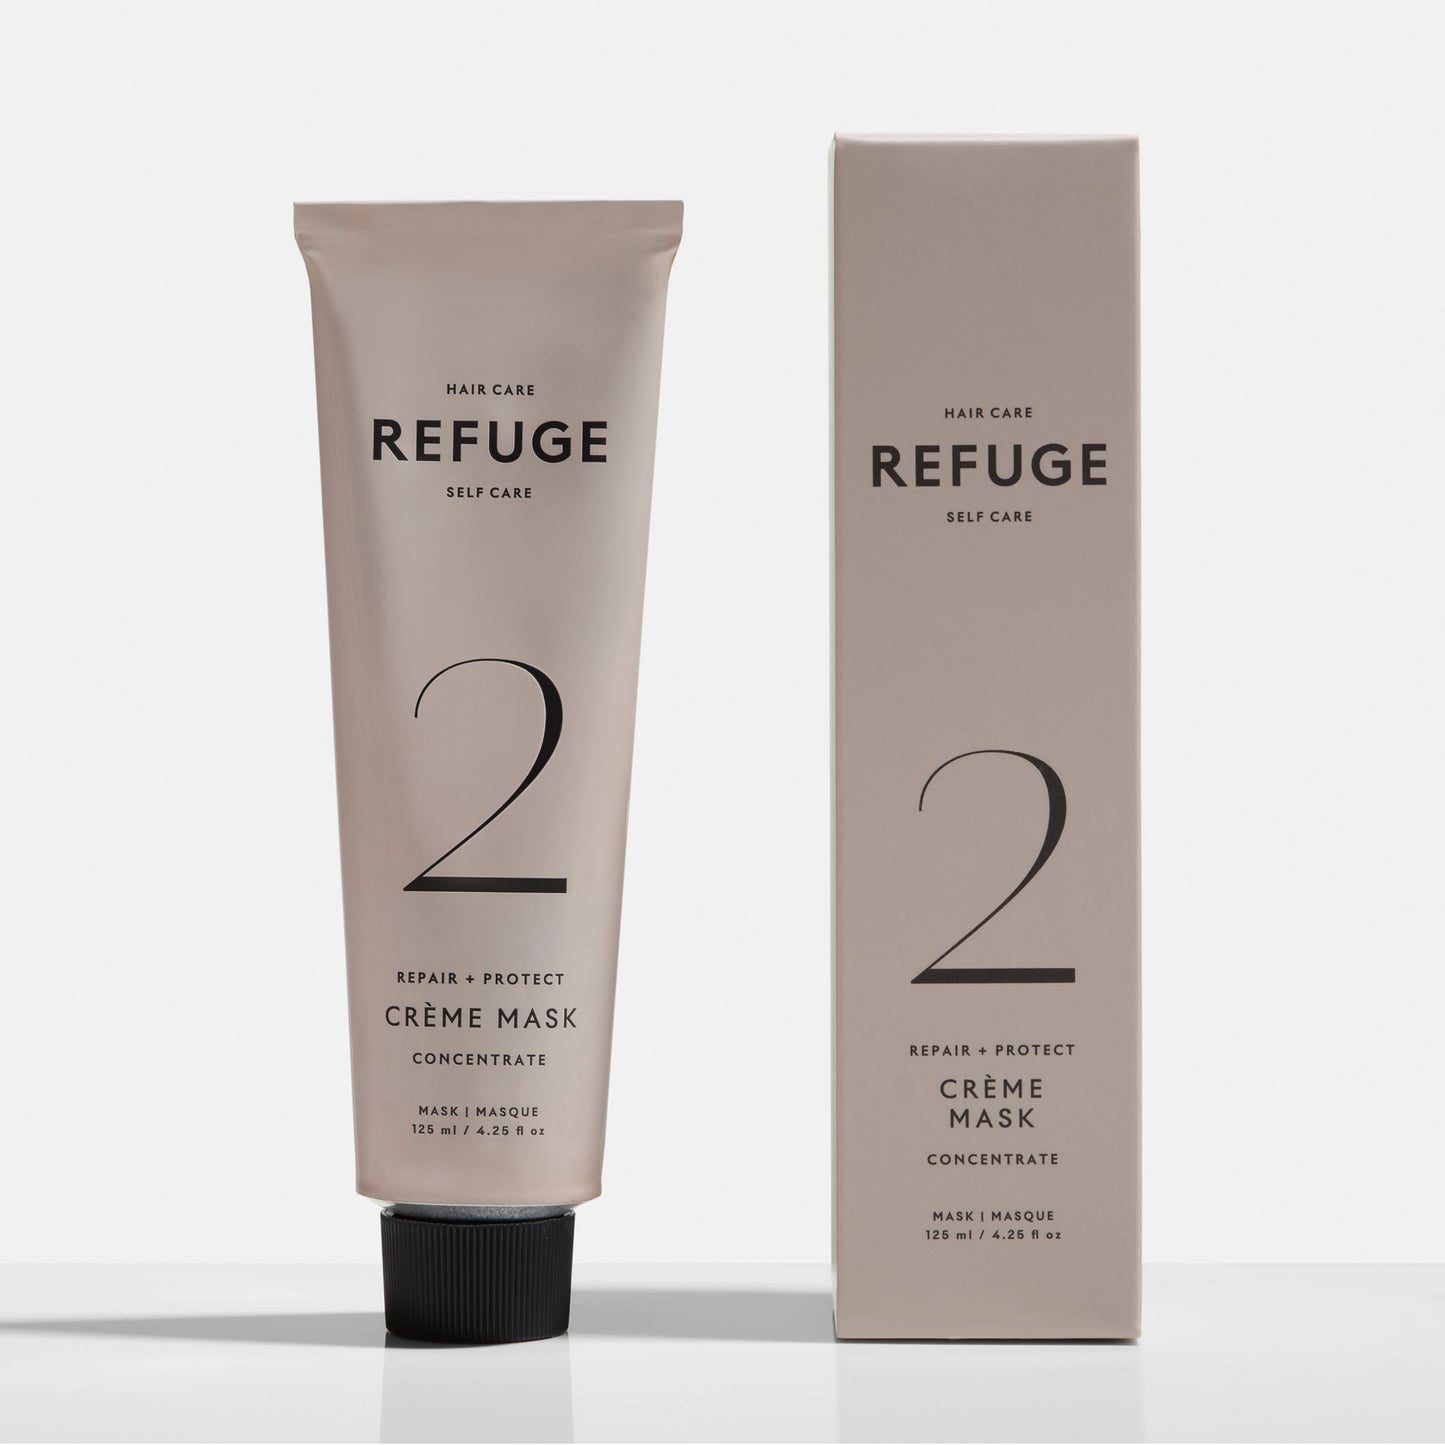 Repair + Protect Crème Mask Concentrate